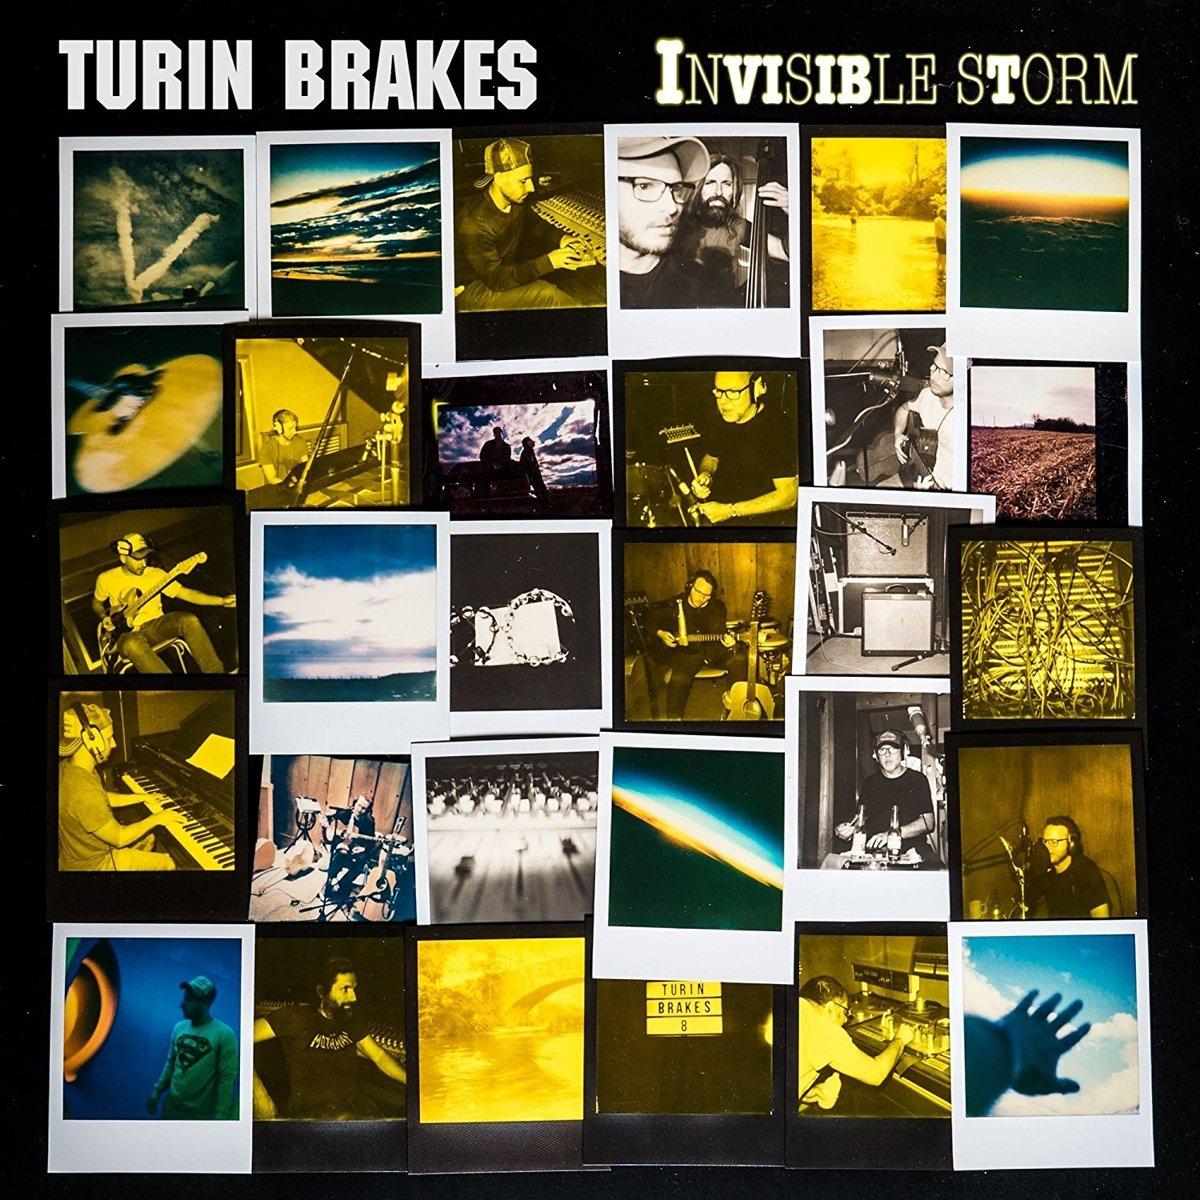 Invisible Storm / Turin Brakes